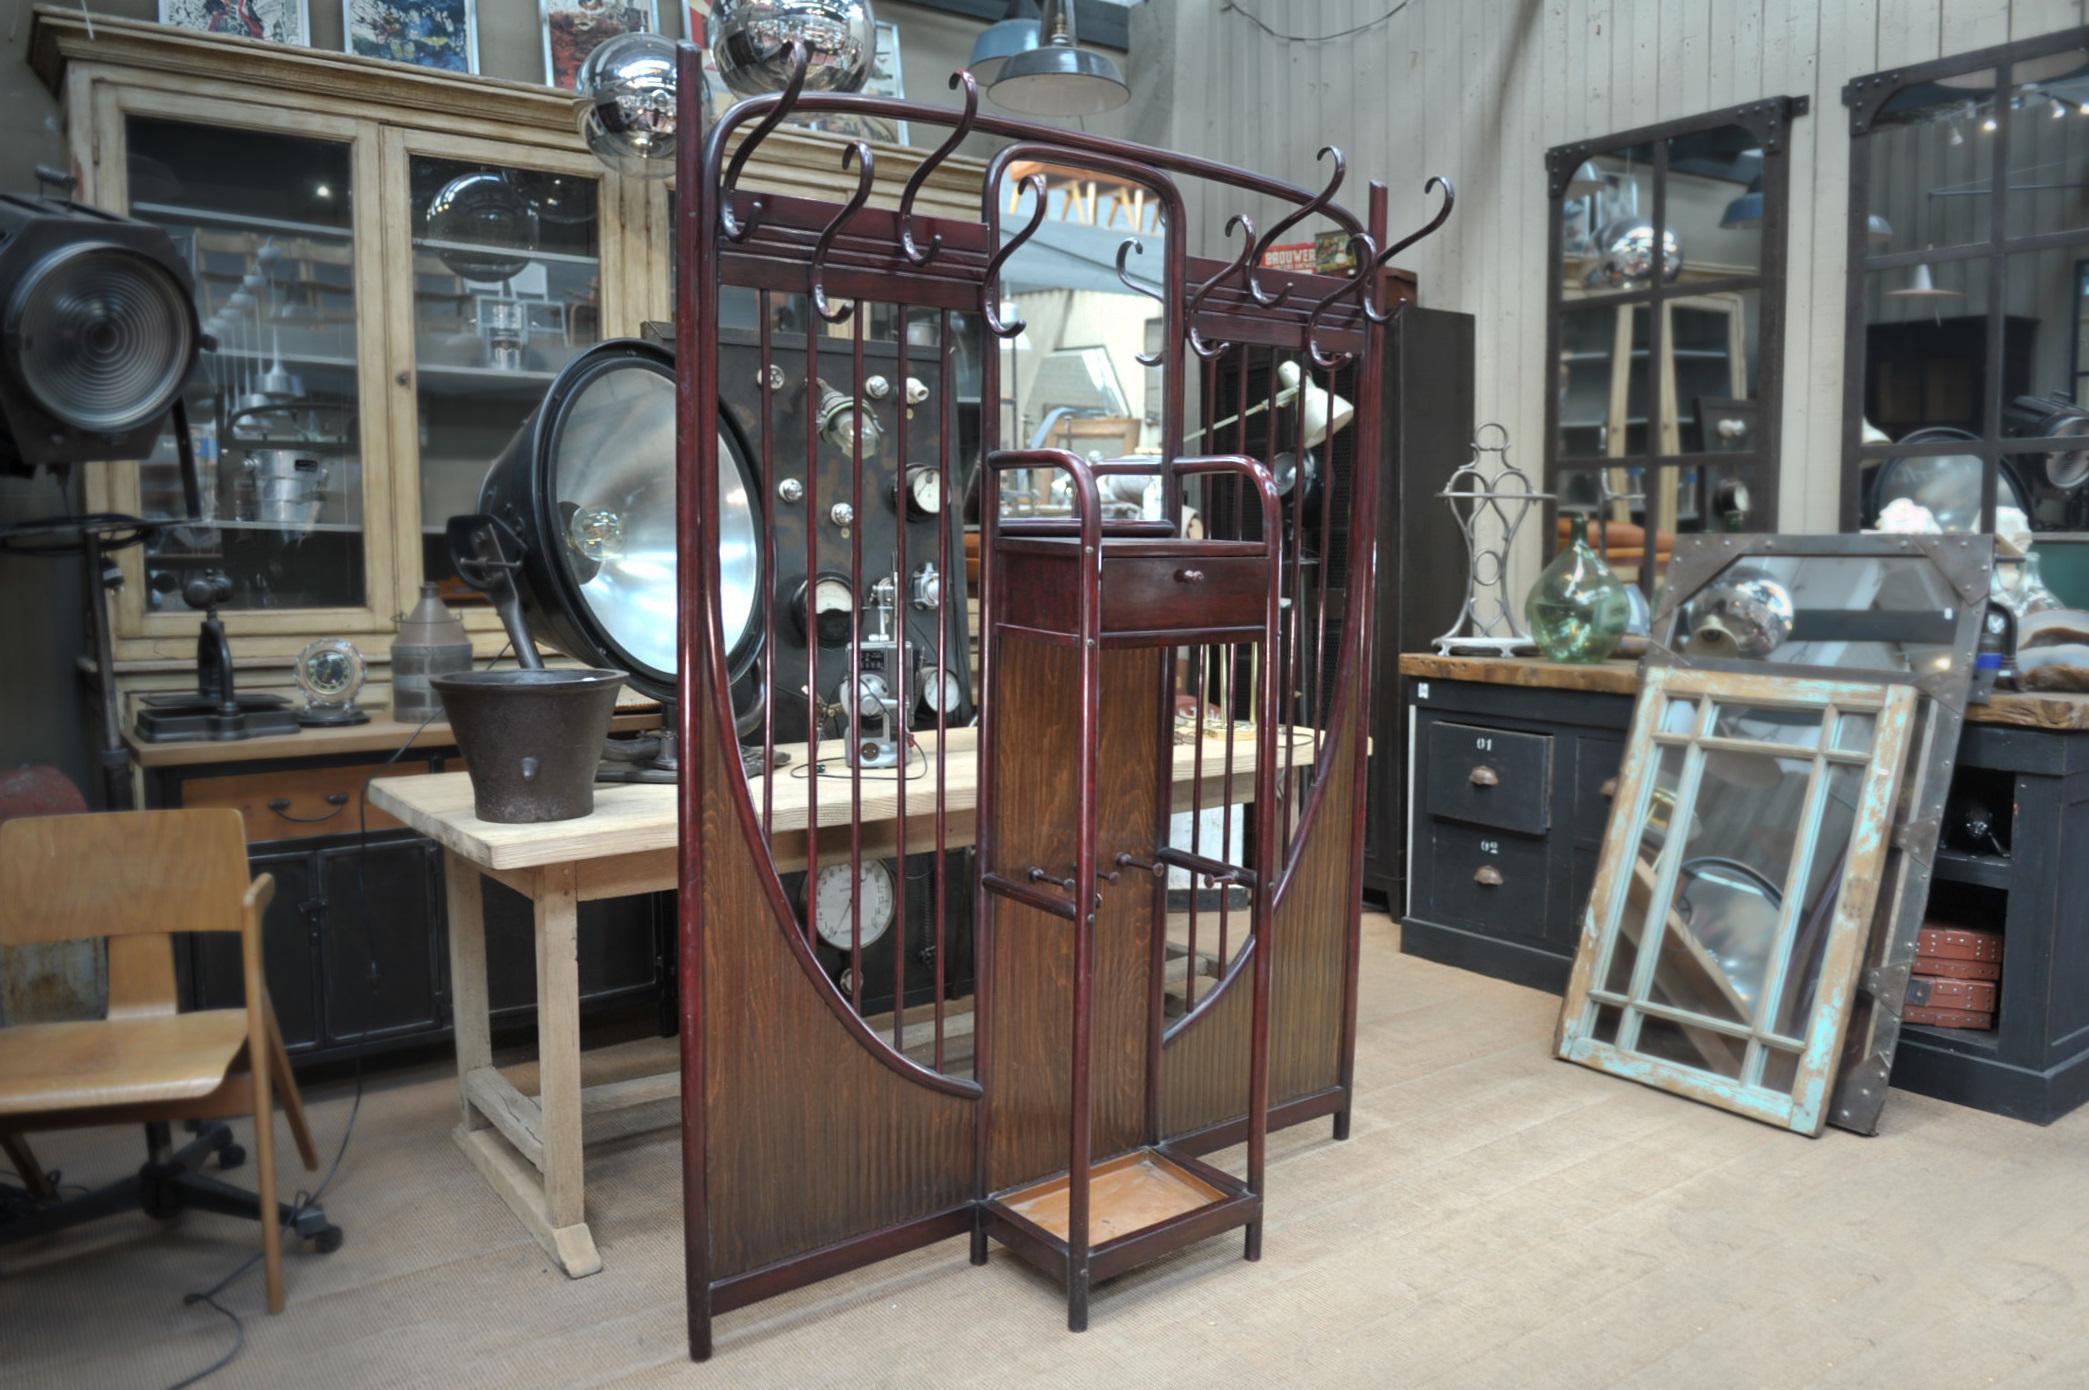 Curved beechwood Thonet coat rack and umbrella stand with original mirror circa 1900 by and signed Thonet.